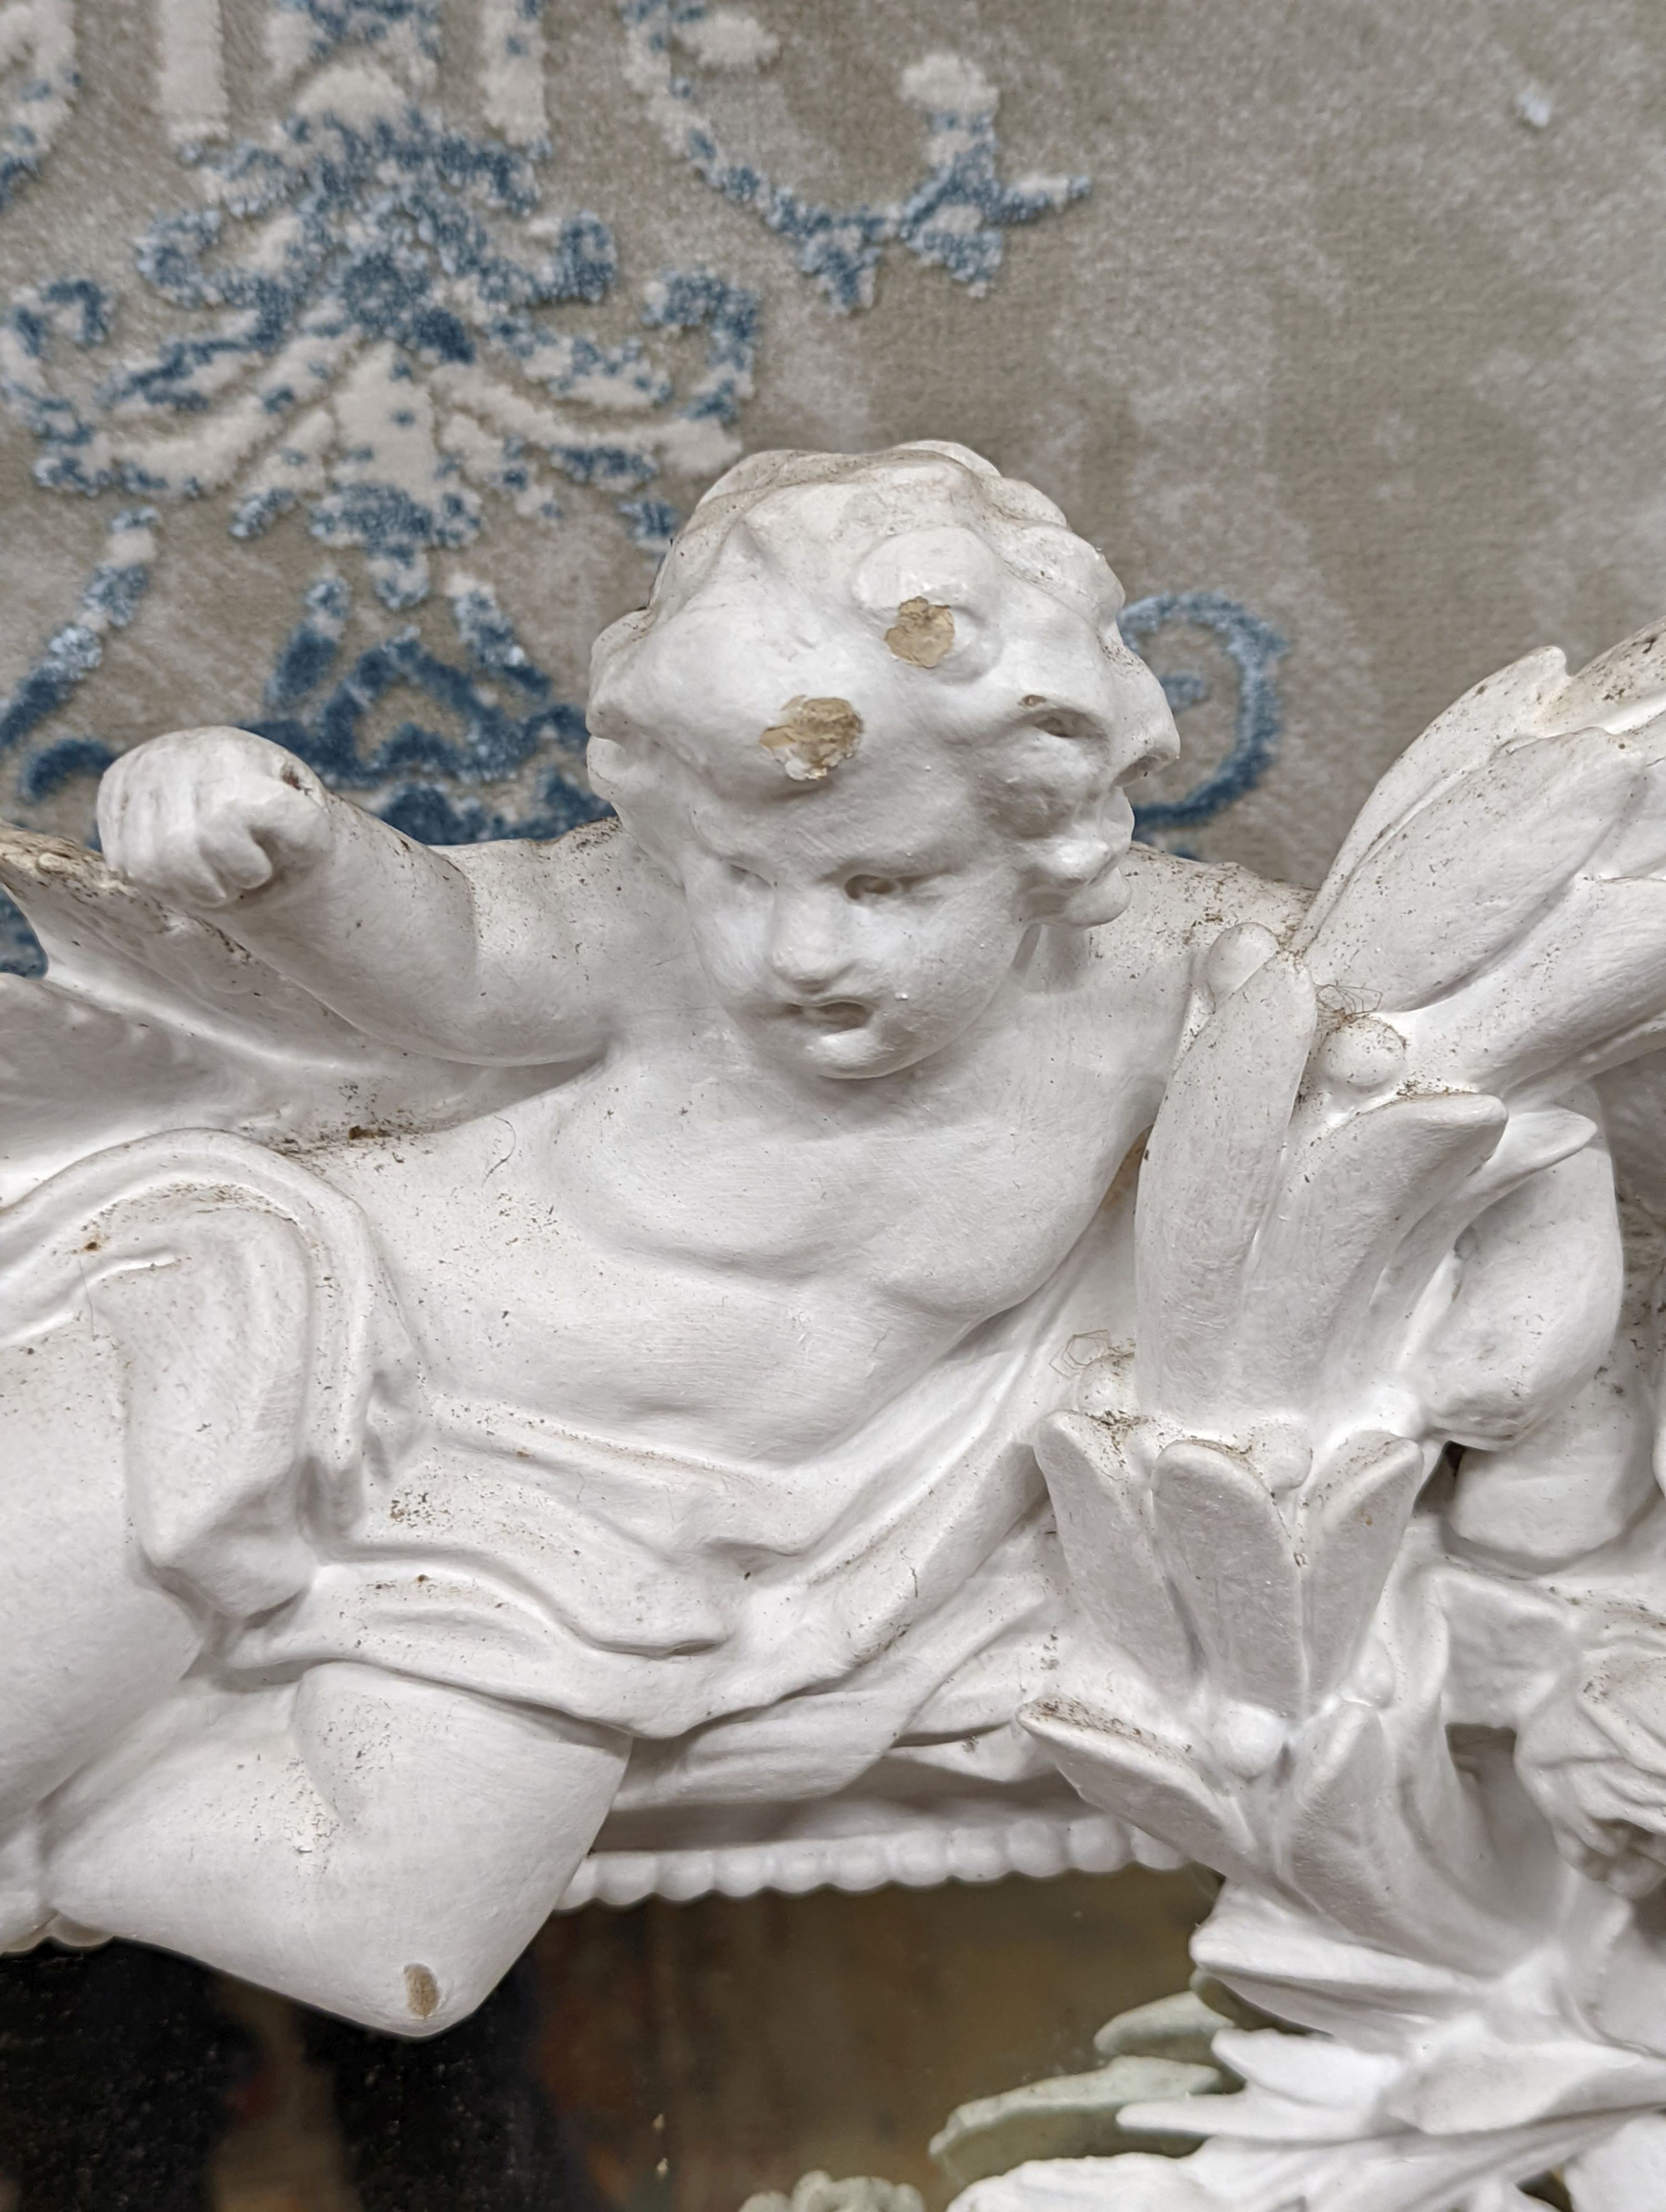 An Edwardian carved wood and gesso overmantel with cherub surmount, later painted white, width 188cm, height 96cm and a two white painted door pediments in need of restoration